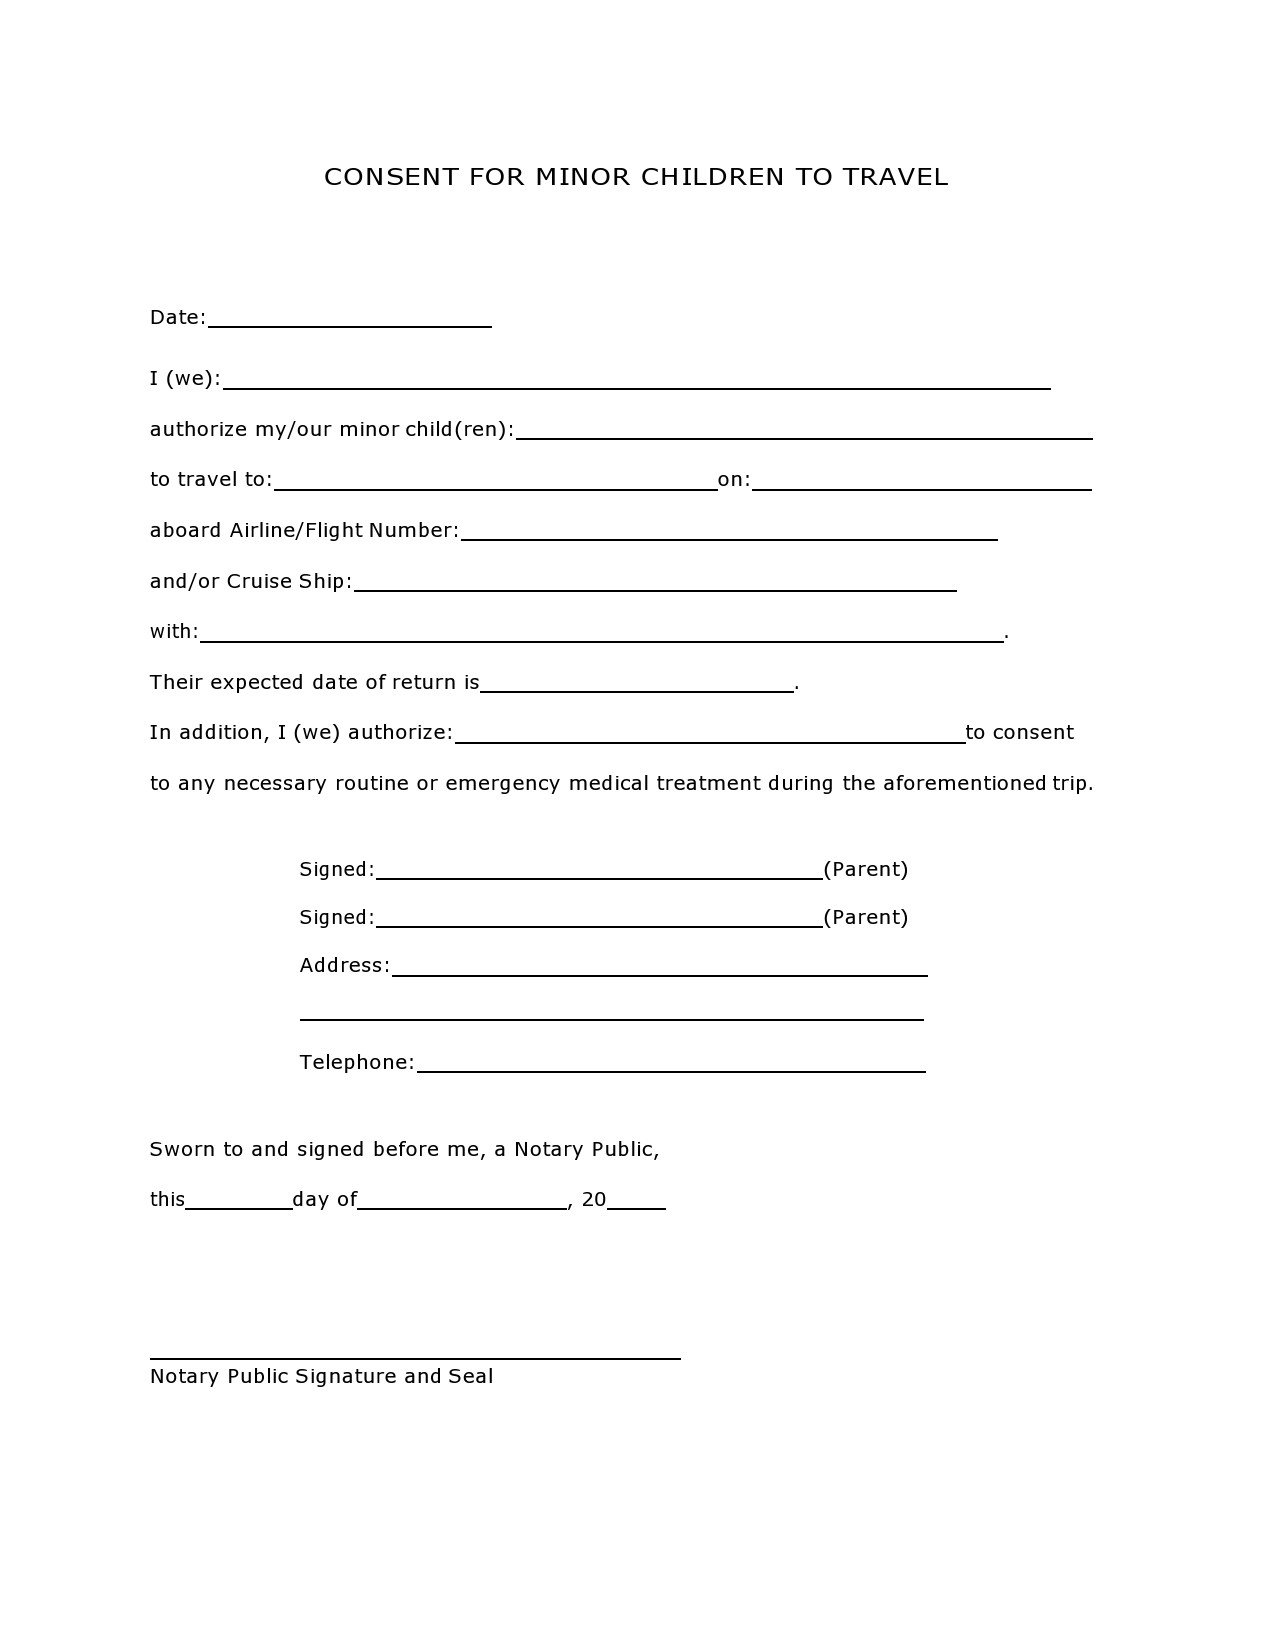 Free Child Travel Consent Form Template Pdf Uk Besttravels